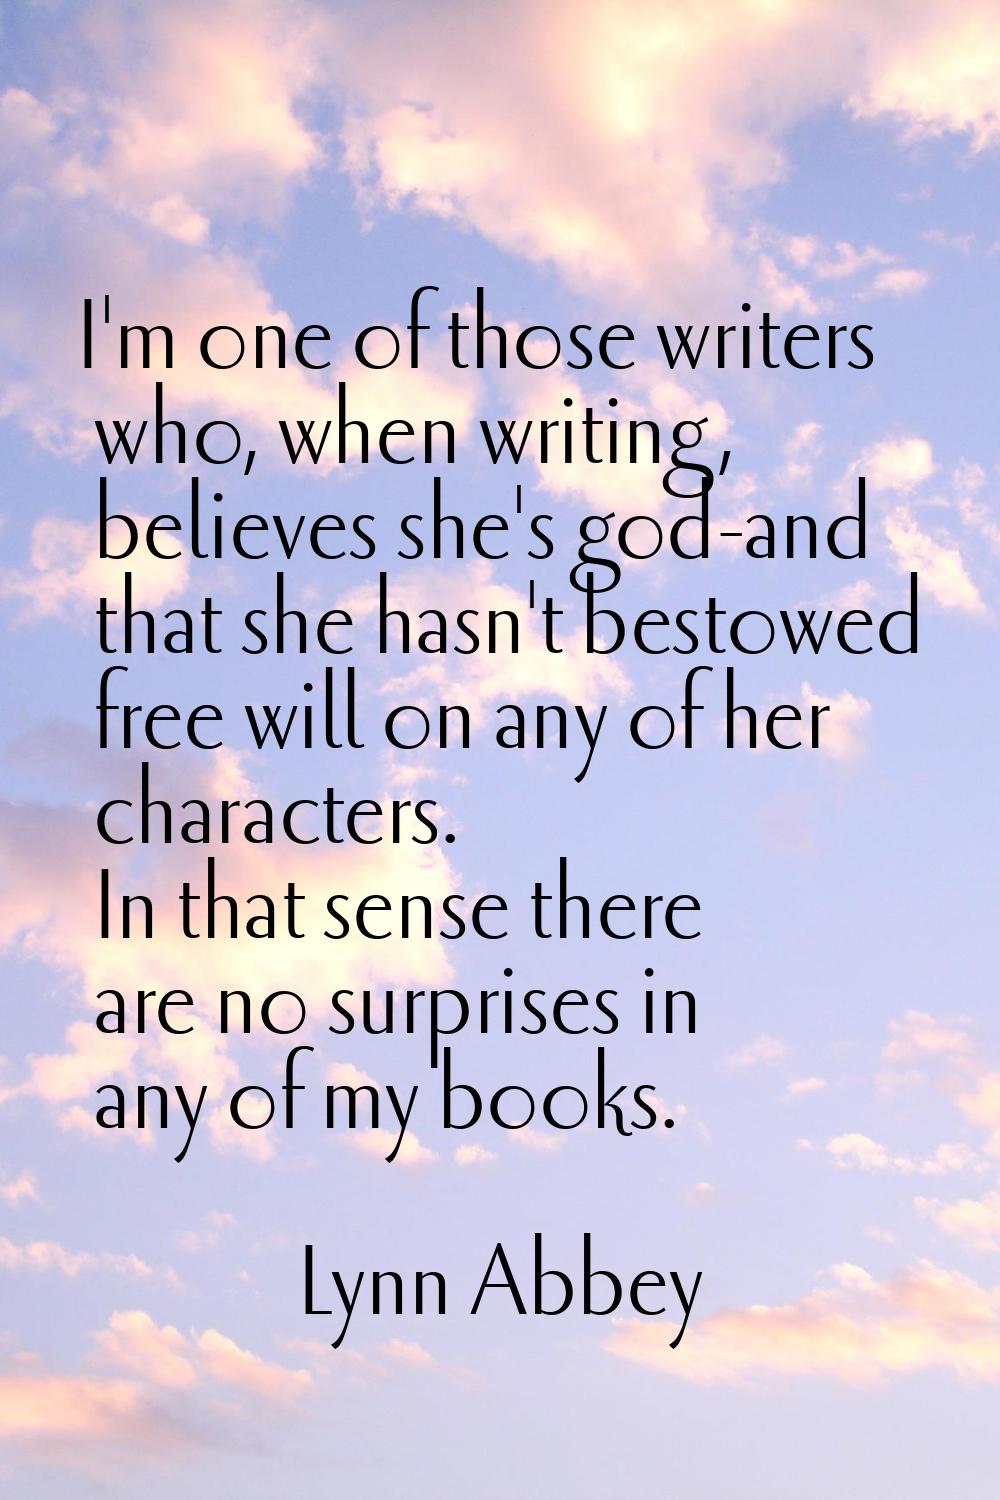 I'm one of those writers who, when writing, believes she's god-and that she hasn't bestowed free wi